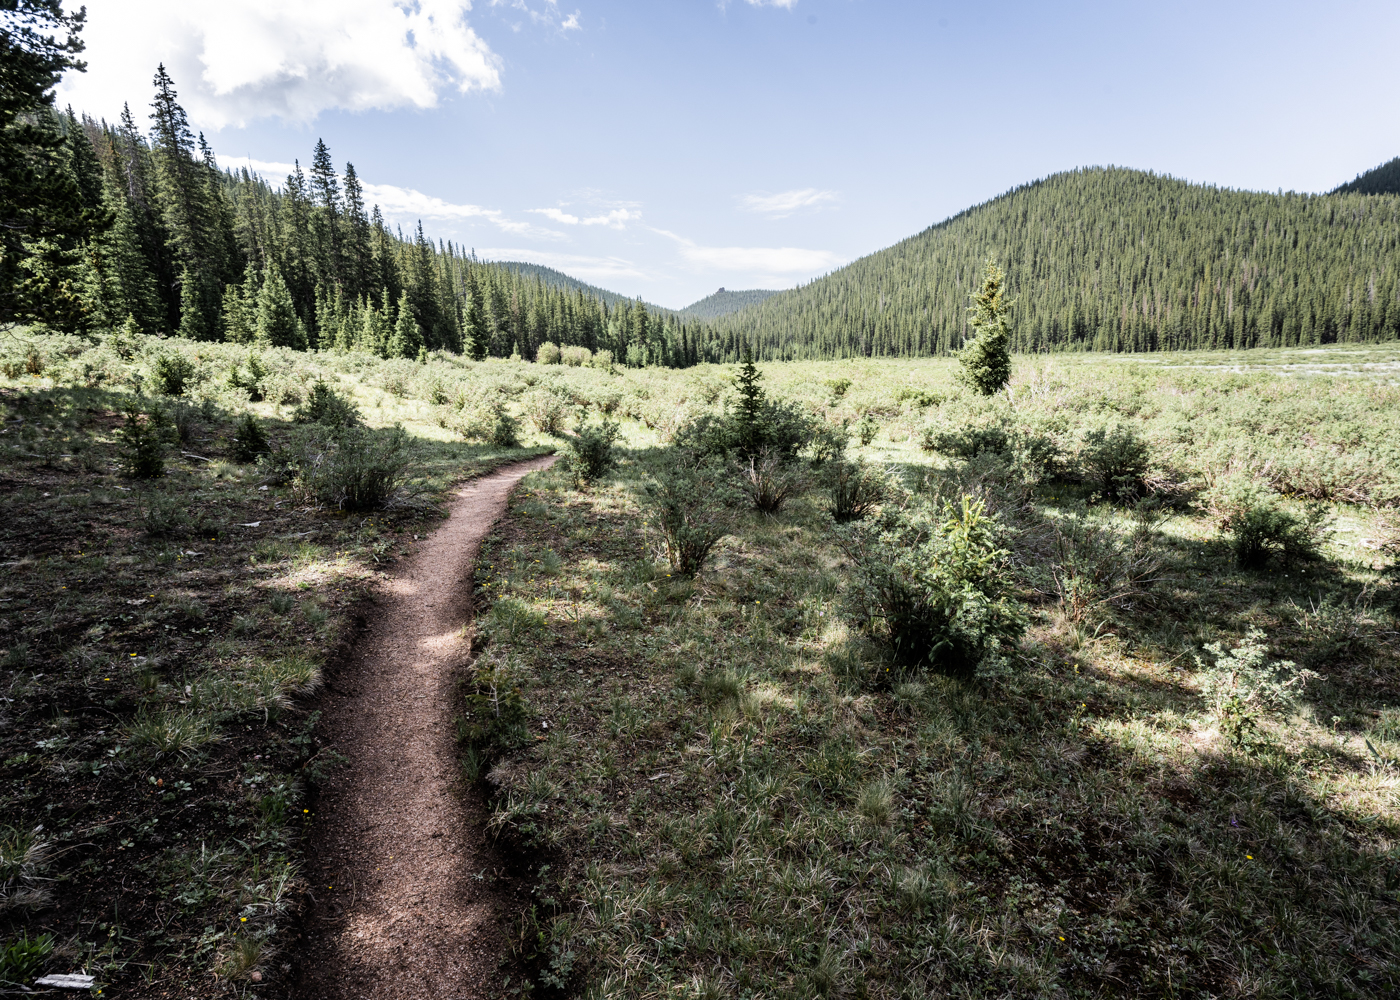 A hiking trail is carved in the direction away from the viewer, in the background an expanse of Colorado pointy evergreen trees